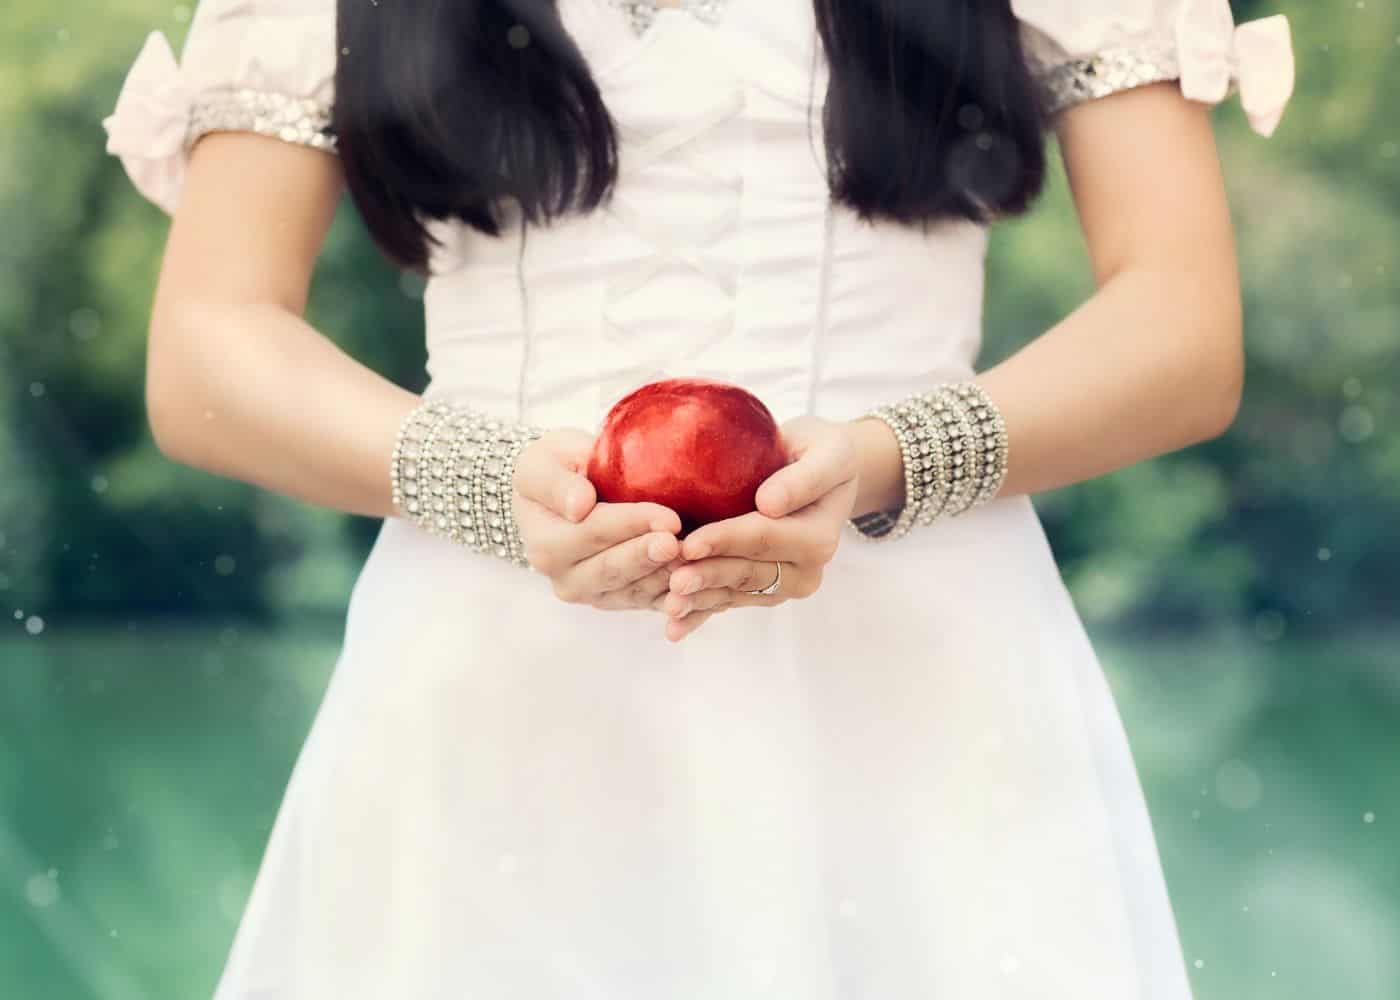 Costume accessories - like apple for snow white